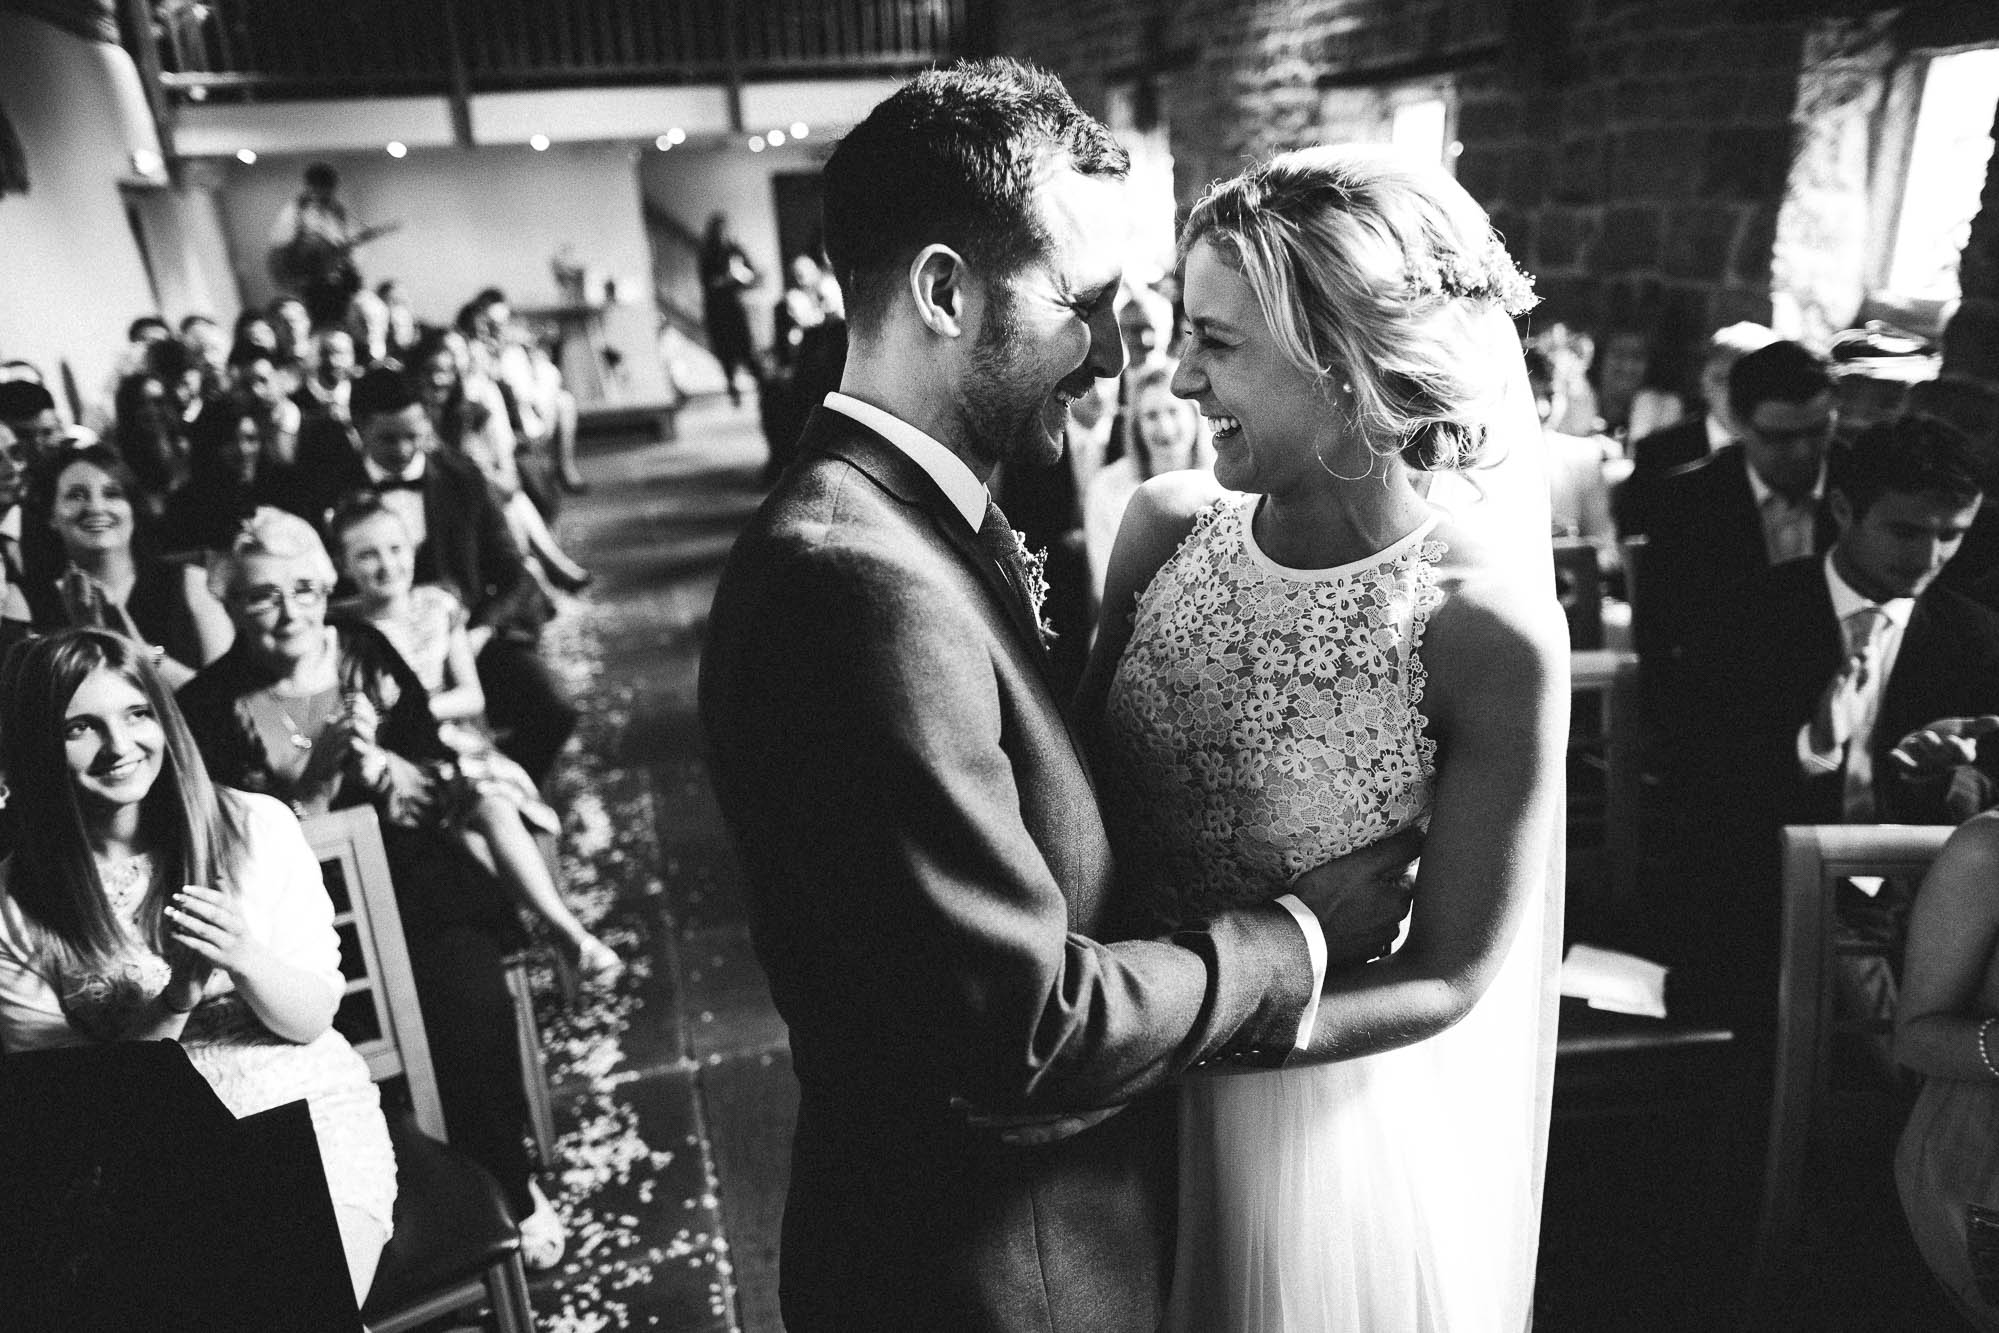 Monochrome shot of newlyweds embracing infront of wedding guests at The Ashes Wedding Barn